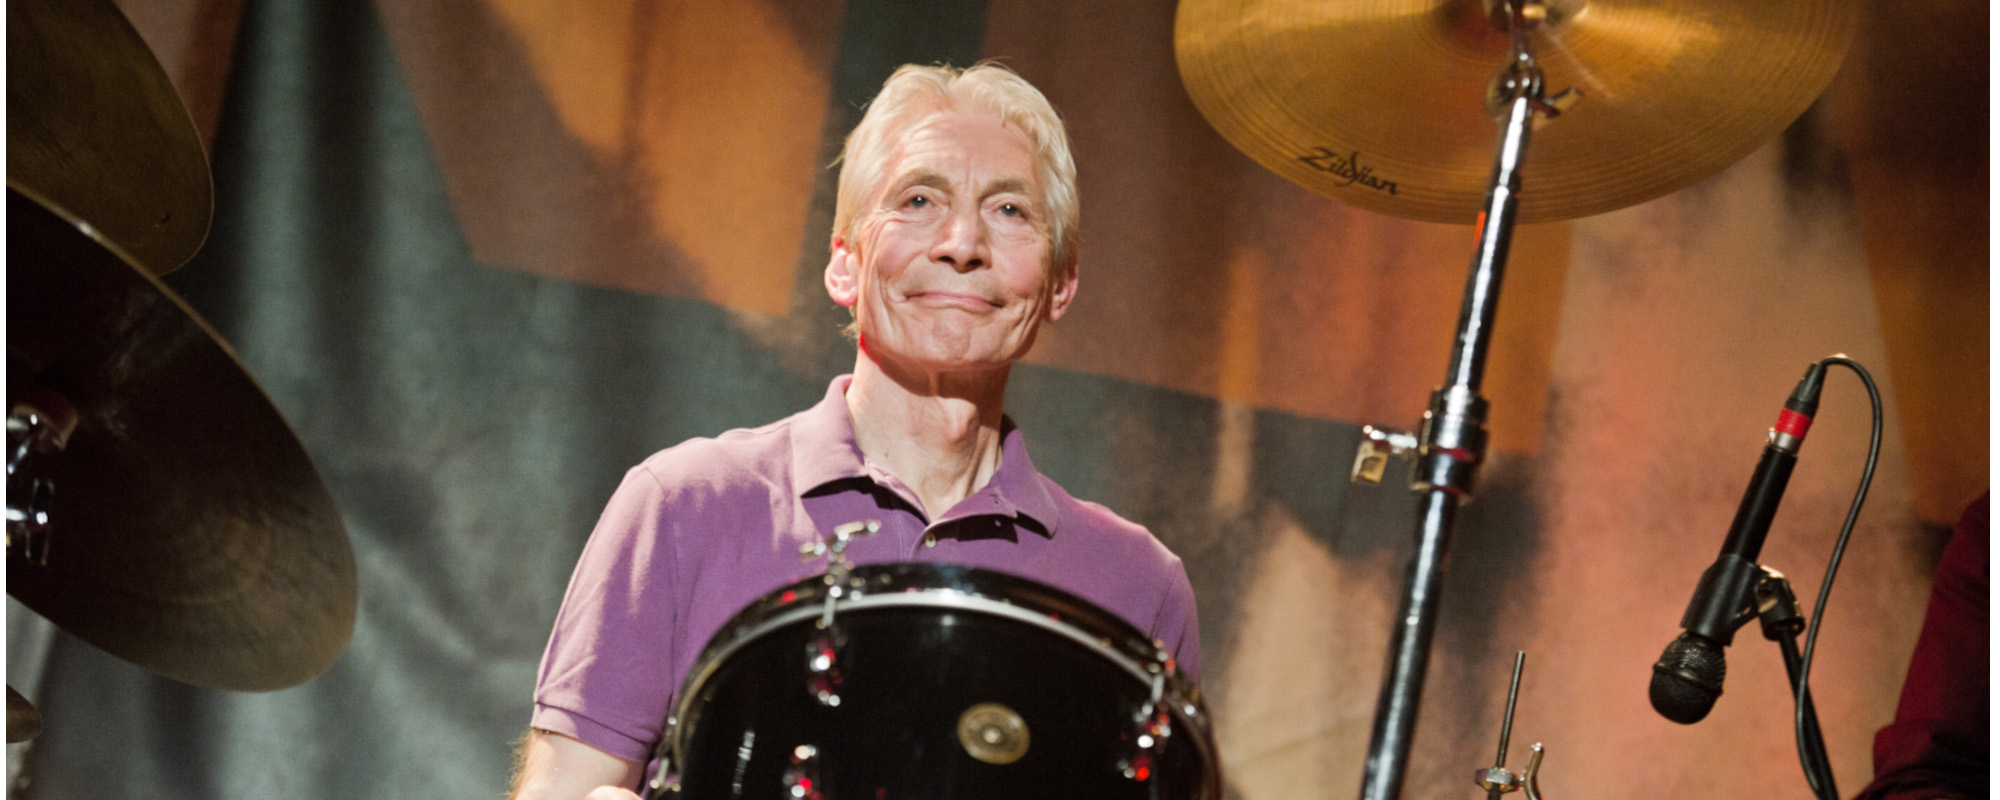 6 Songs You Didn’t Know Charlie Watts Wrote for the Rolling Stones